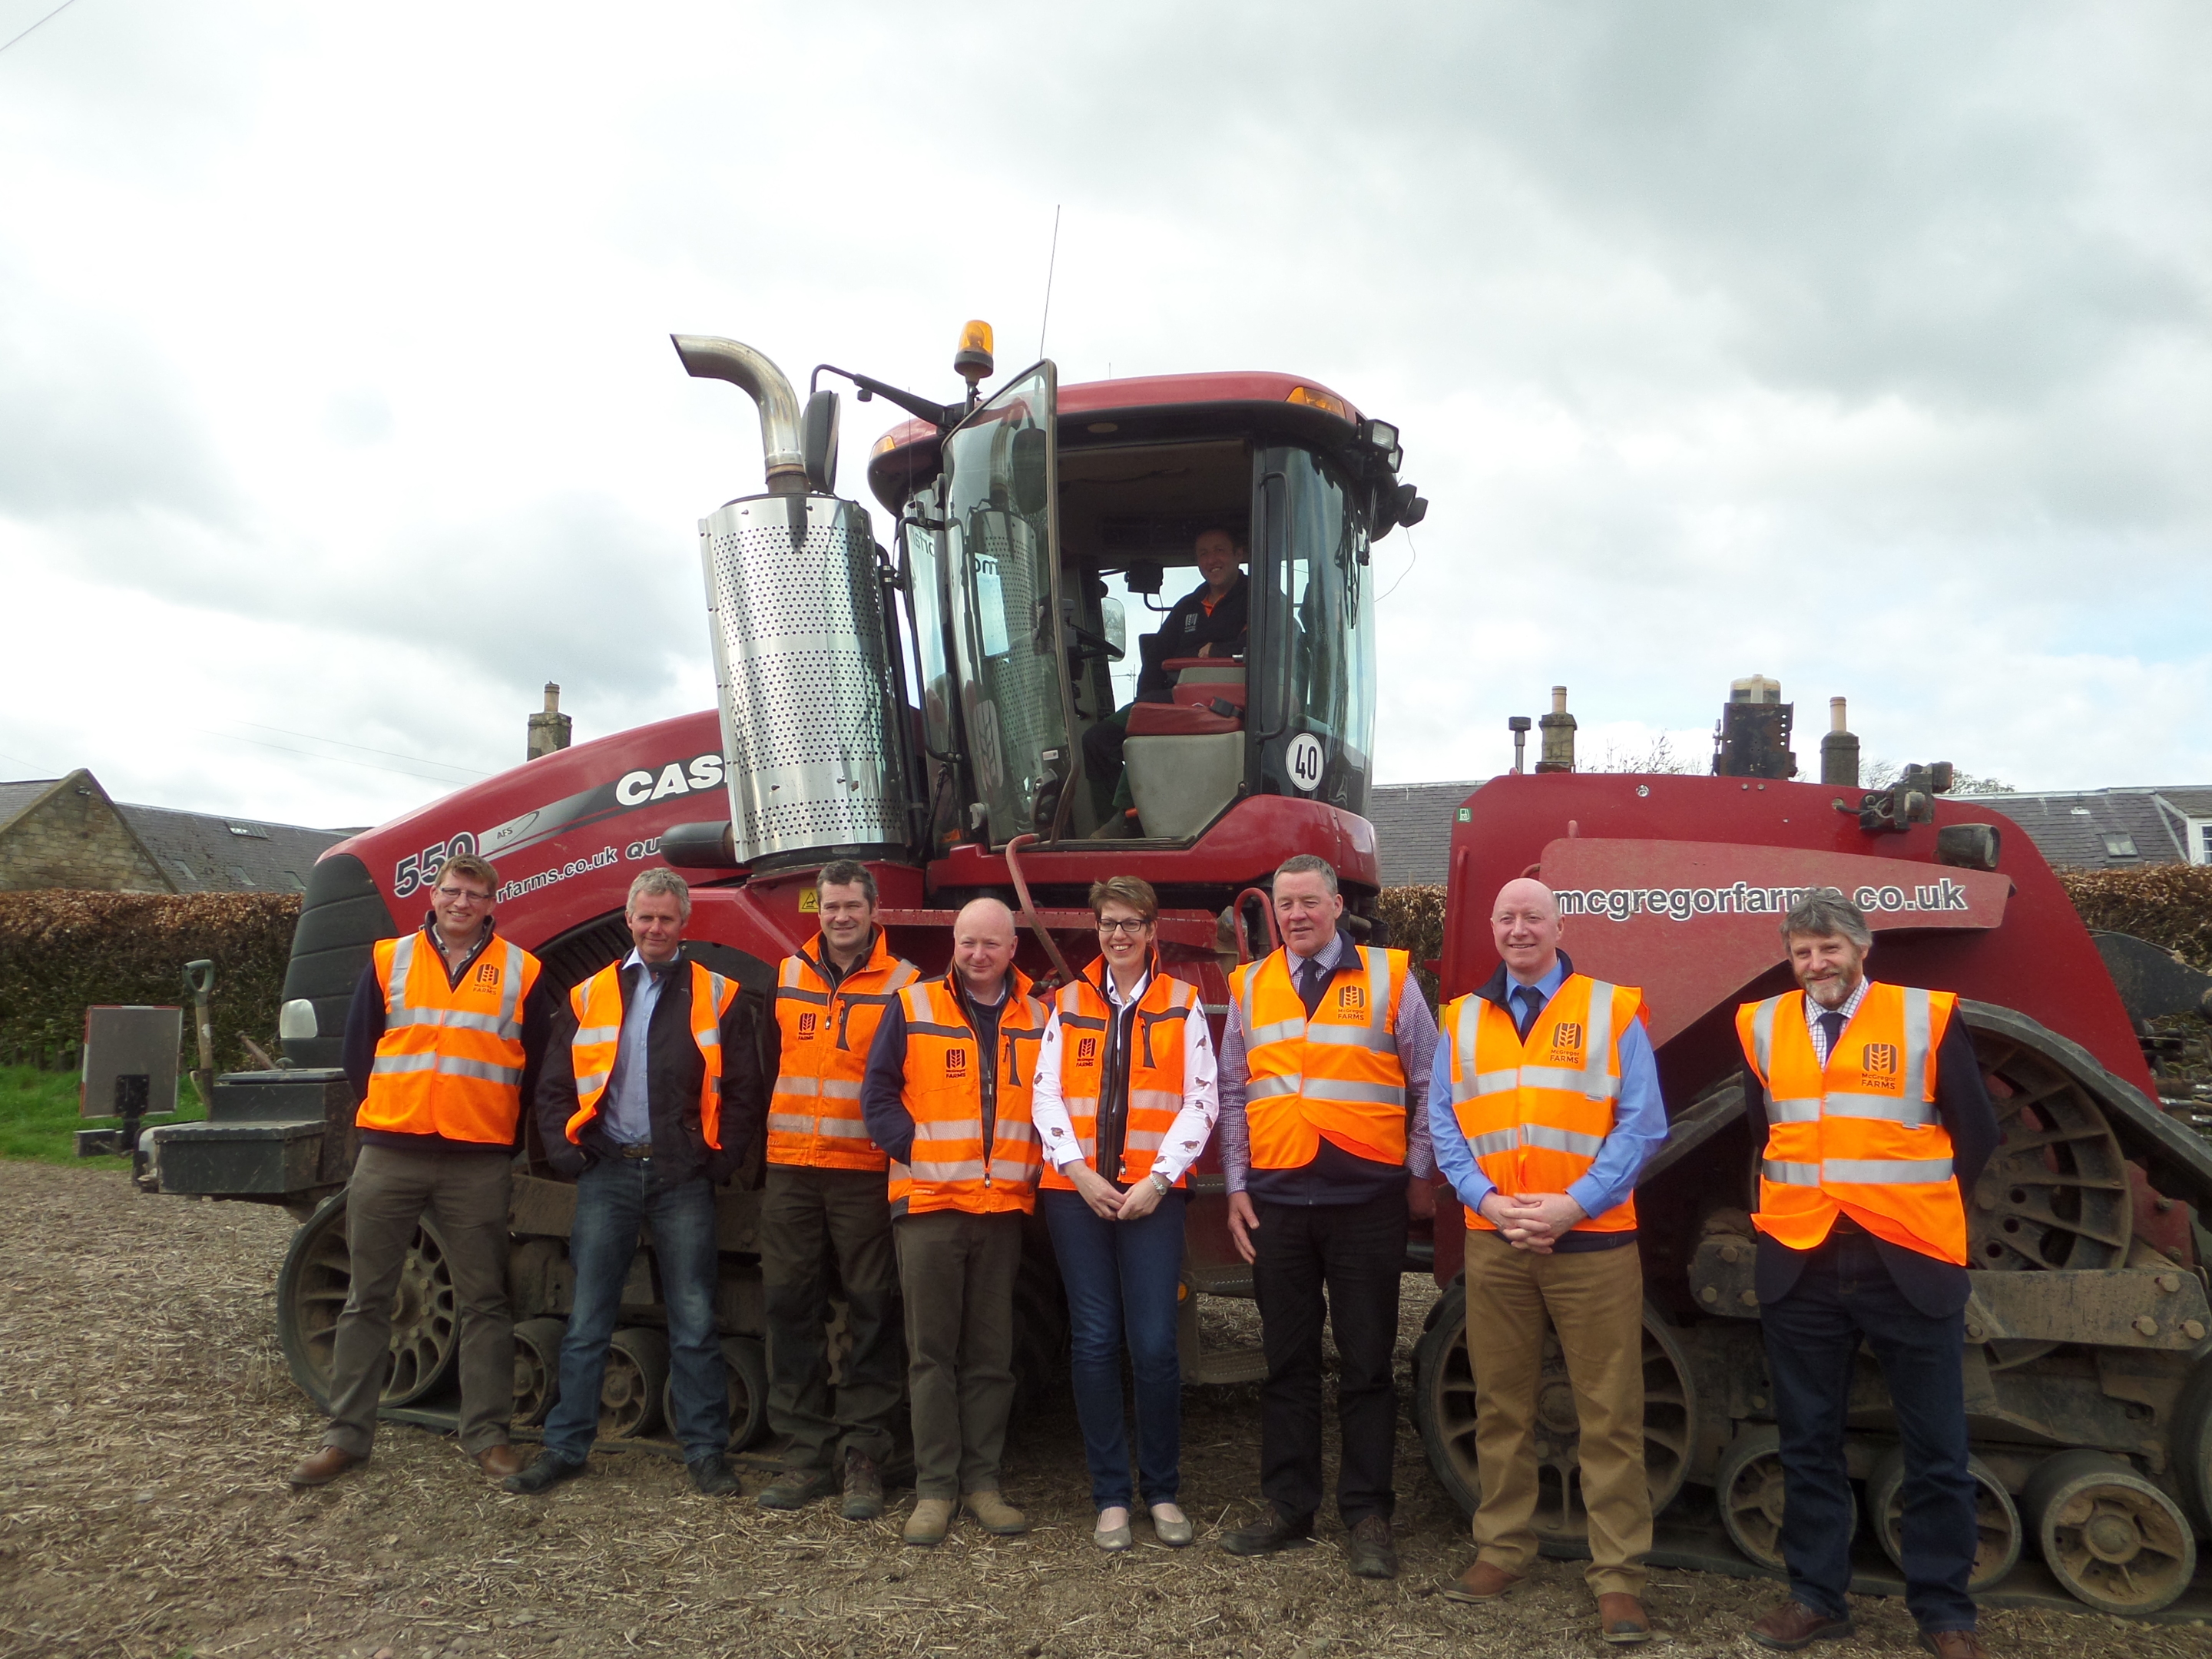 L-R: Willie Thomson (Combinable Crops Committee Vice Chairman), Kelvin Pate (Lothians and Borders Regional Chairman), David Fuller, Colin McGregor, Jill McGregor (all McGregor Farms), President Andrew McCornick and Vice Presidents Gary Mitchell and Martin Kennedy.